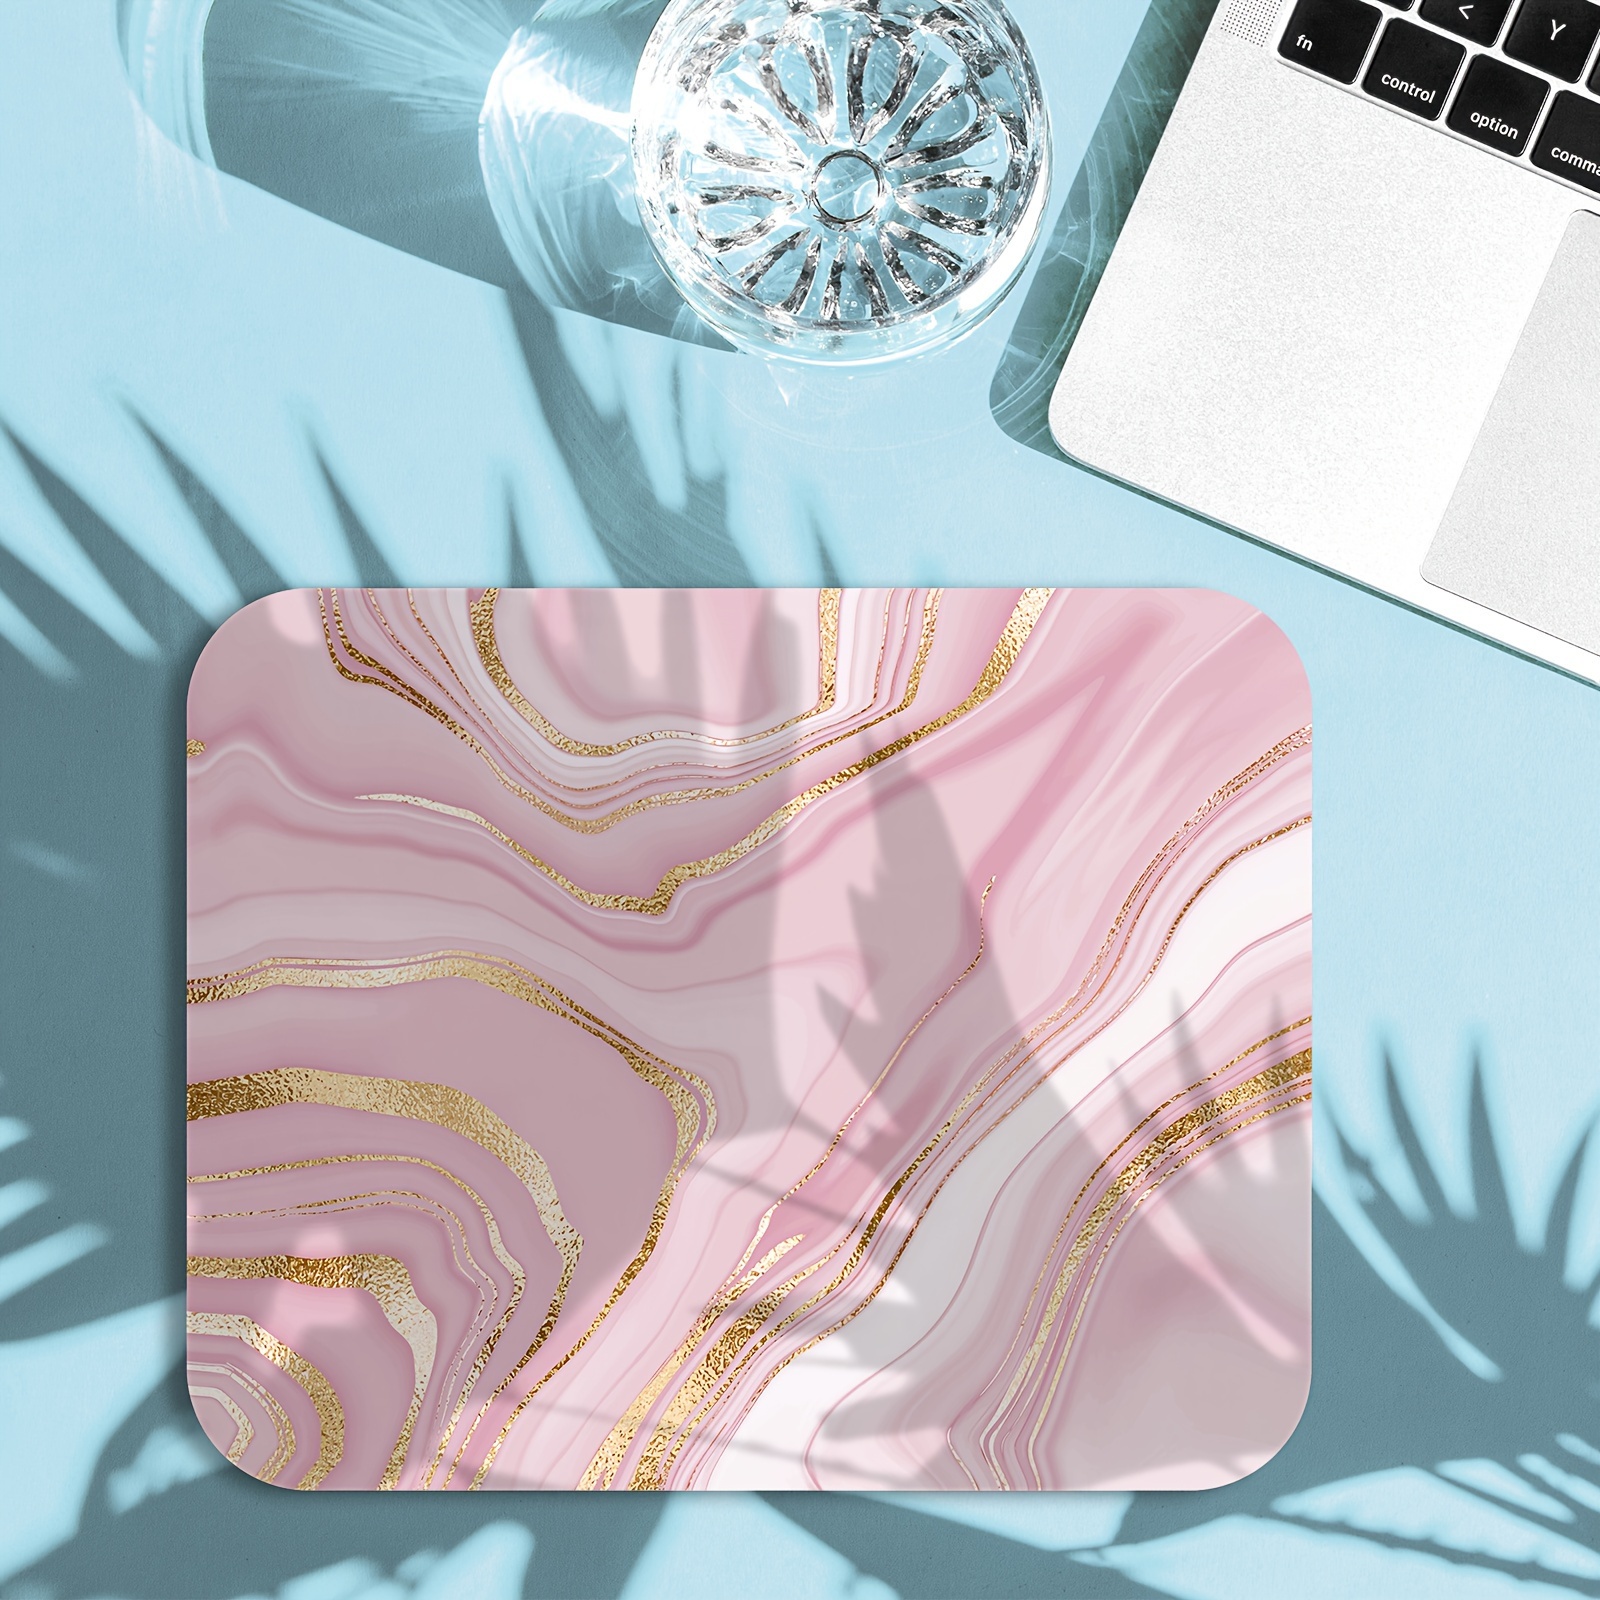 

1pc Pu Leather Mouse Pad, Hd Printed Golden Marble Design, Water-proof & Non-slip, Decorative Accessories For Home, Office, Suitable For Computers, Laptops